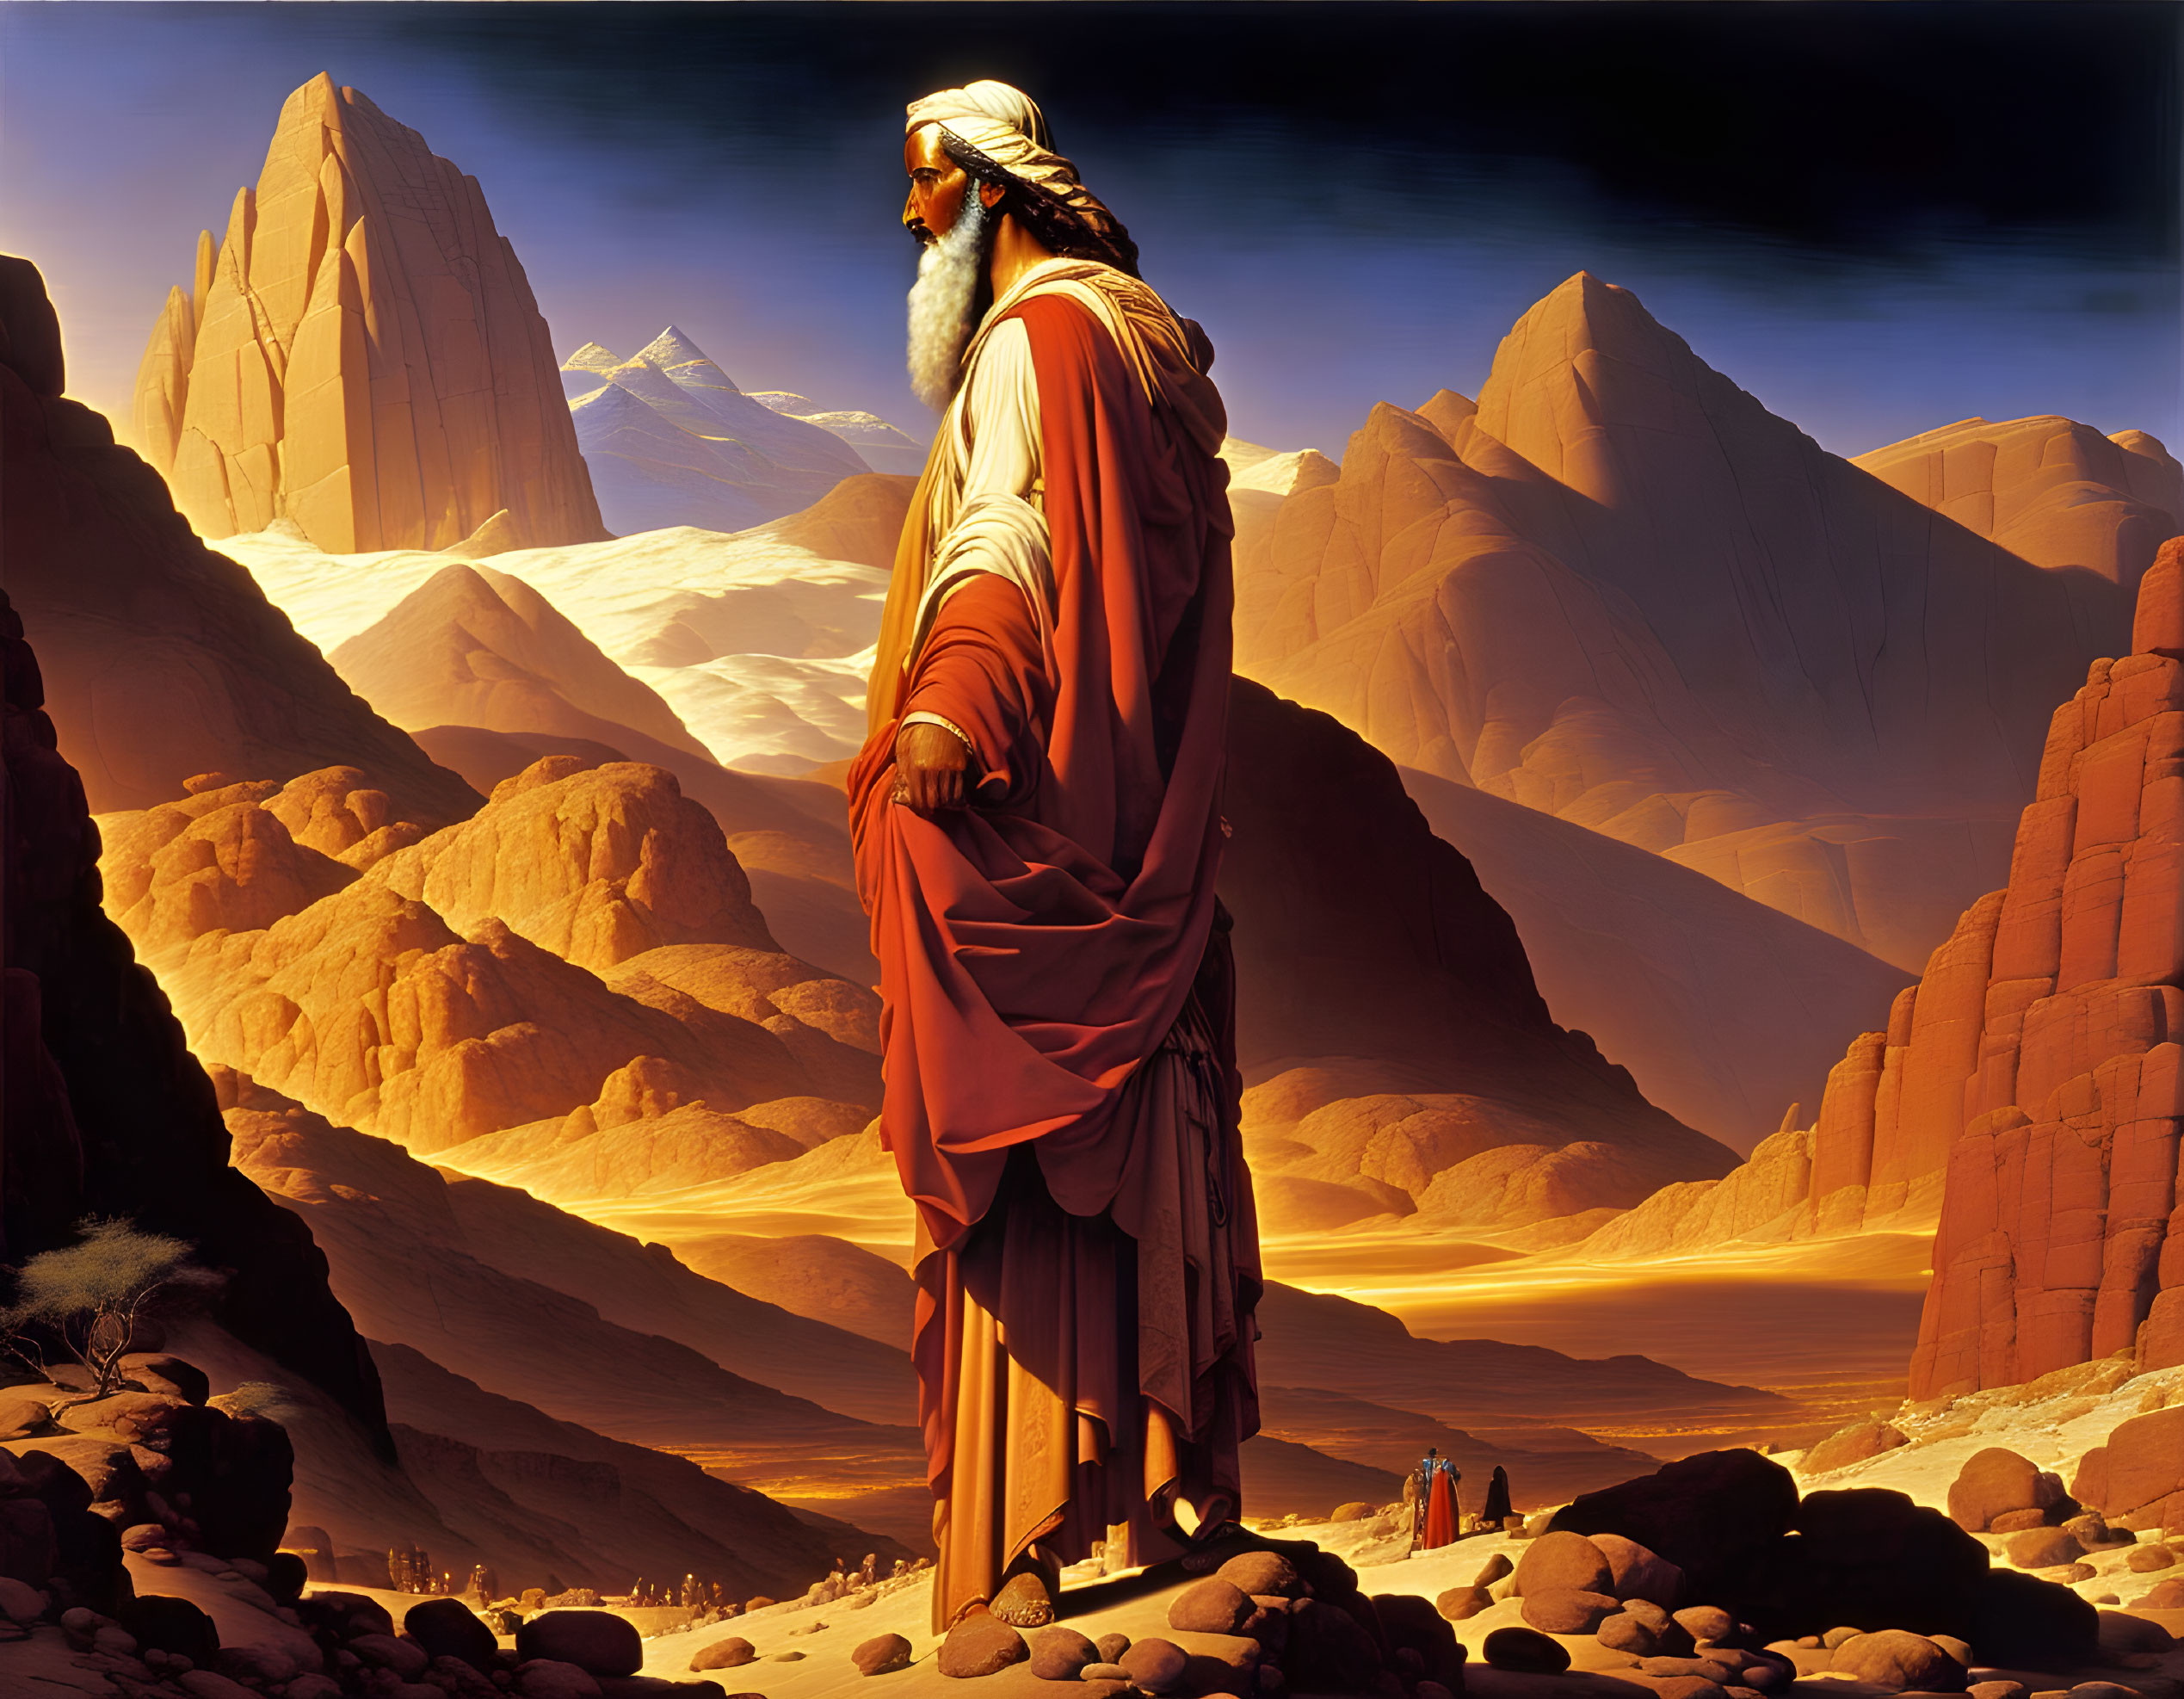 Moses arrived at the bottom of Mount Sinai